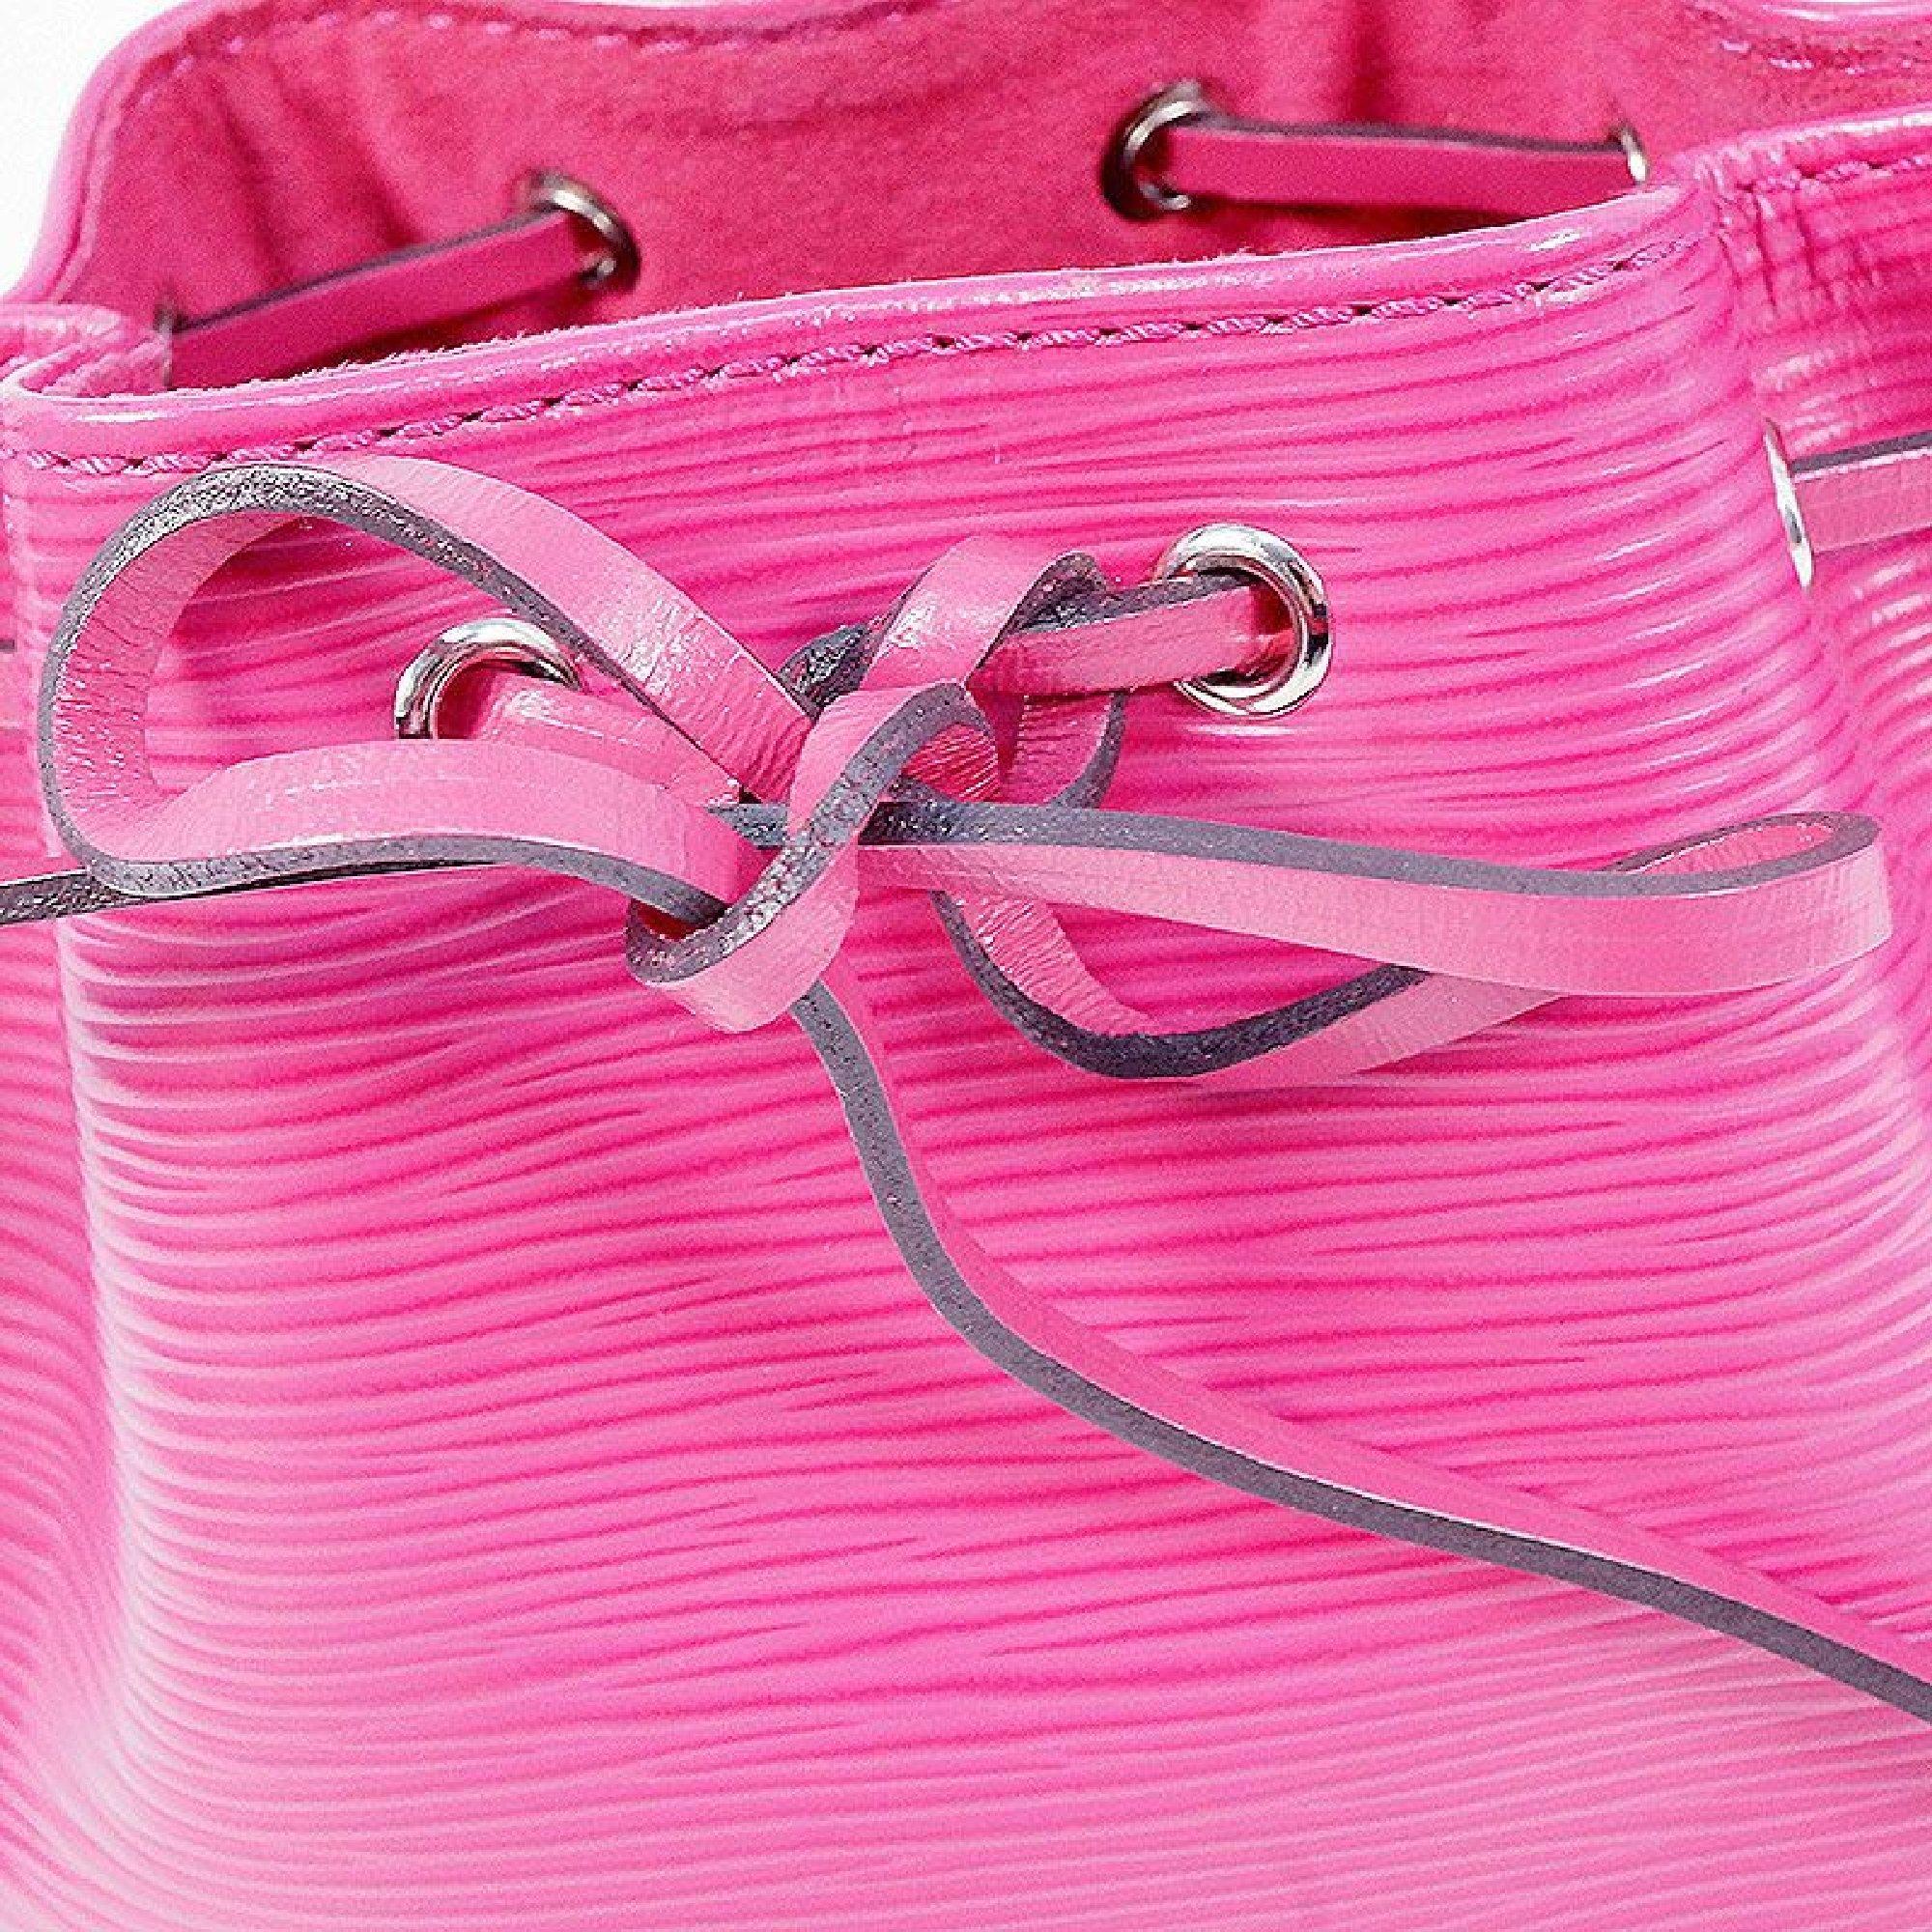 An authentic LOUIS VUITTON nano Noe Womens shoulder bag M42573 pivoine. The color is pivoine. The outside material is Epi leather. The pattern is nano Noe. This item is Contemporary. The year of manufacture would be 2016.
Rank
AB signs of wear